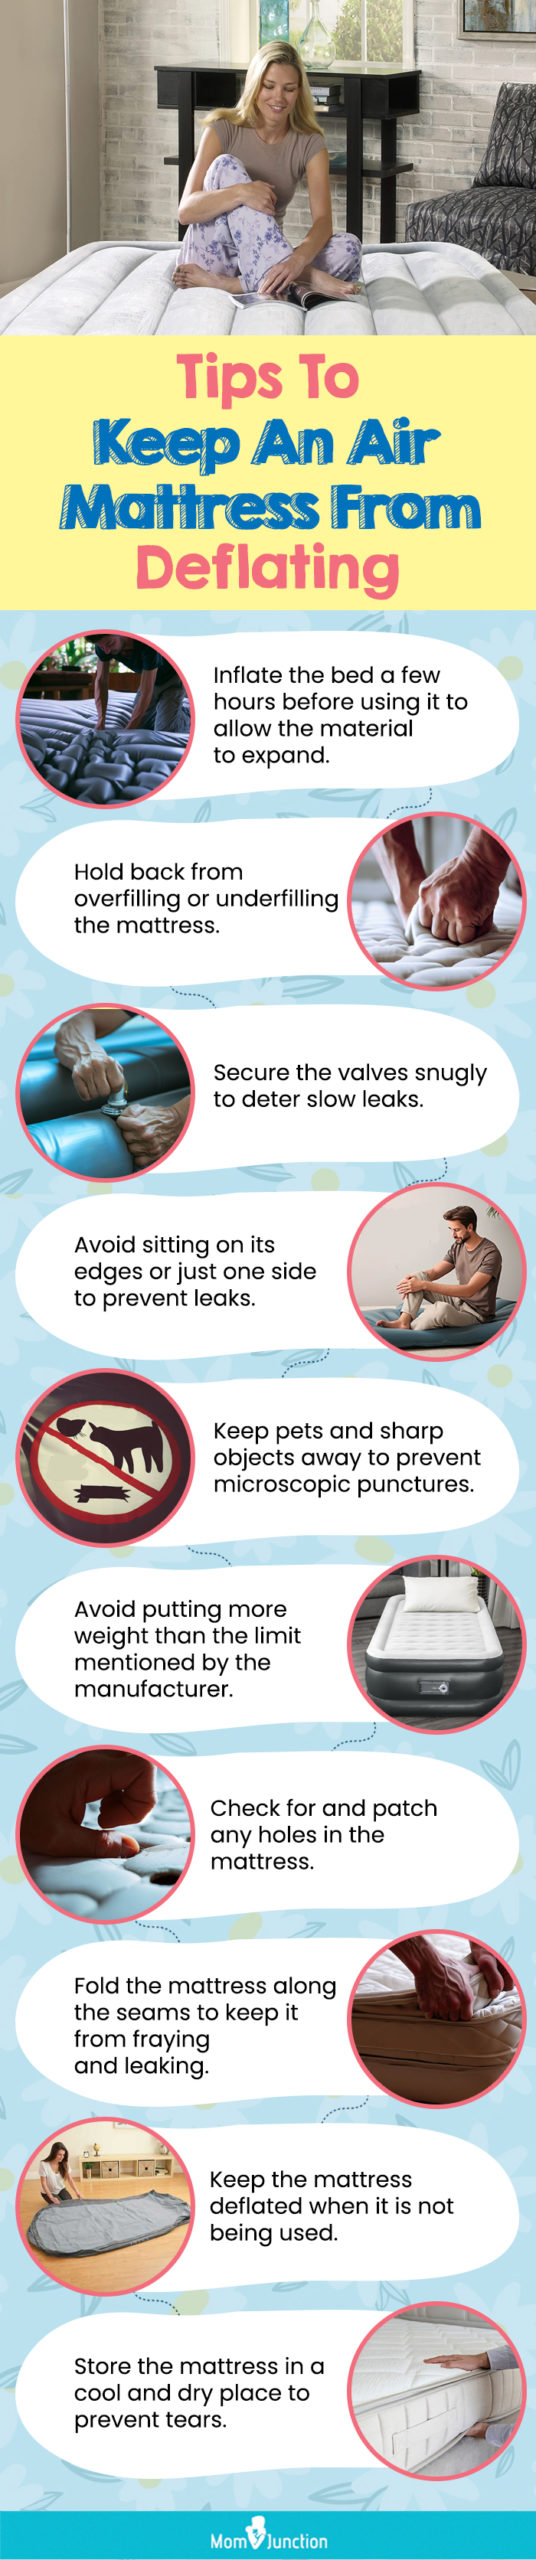 Tips To Keep An Air Mattress From Deflating (infographic)